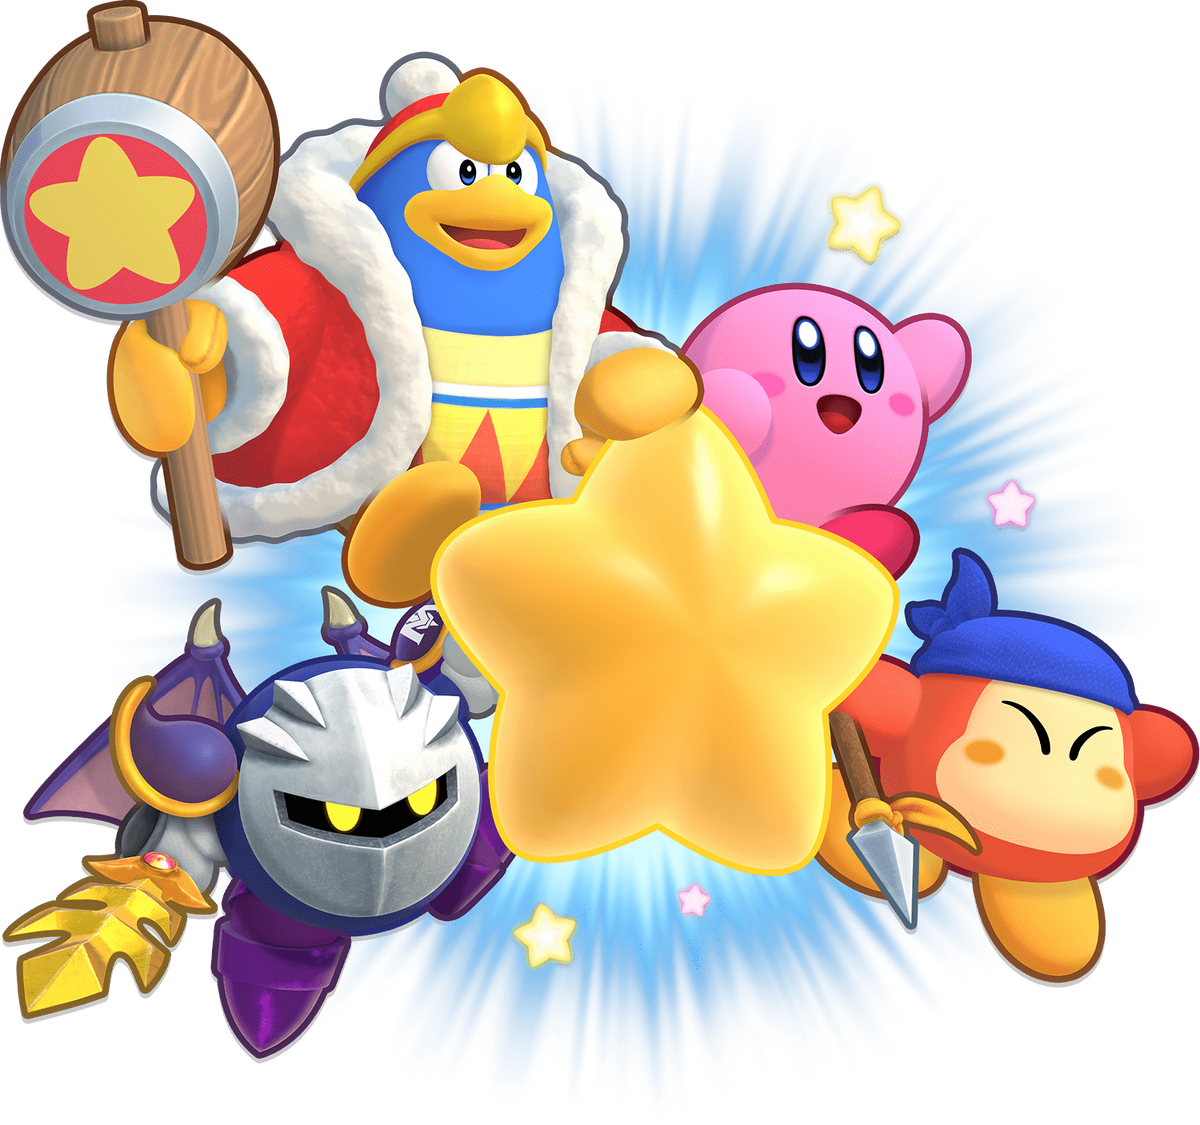 https://static.wikia.nocookie.net/kirby/images/5/54/Warpstar_KRtDLDX.png/revision/latest/scale-to-width-down/1200?cb=20230529124832&path-prefix=en